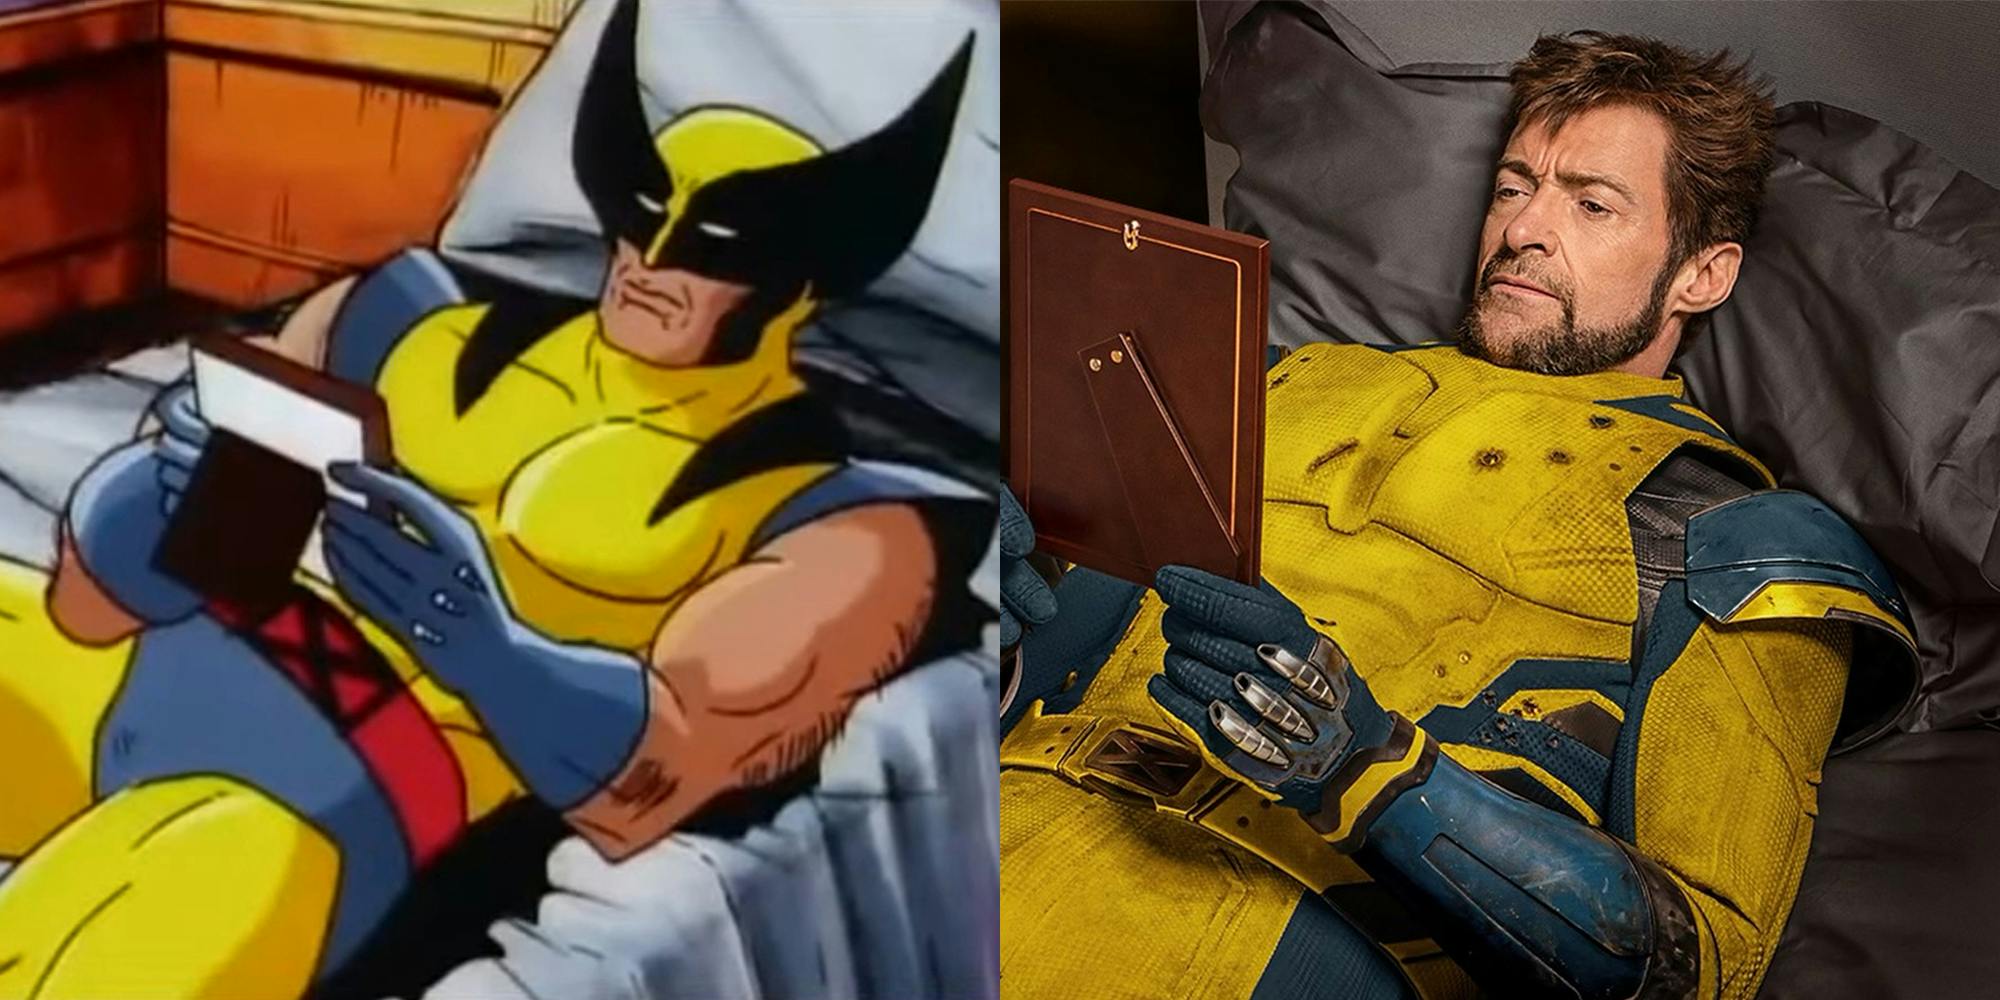 wolverine looking at a photo, X-Men the animated series (l) Hugh Jackman as Wolverine looking at a photo (r)